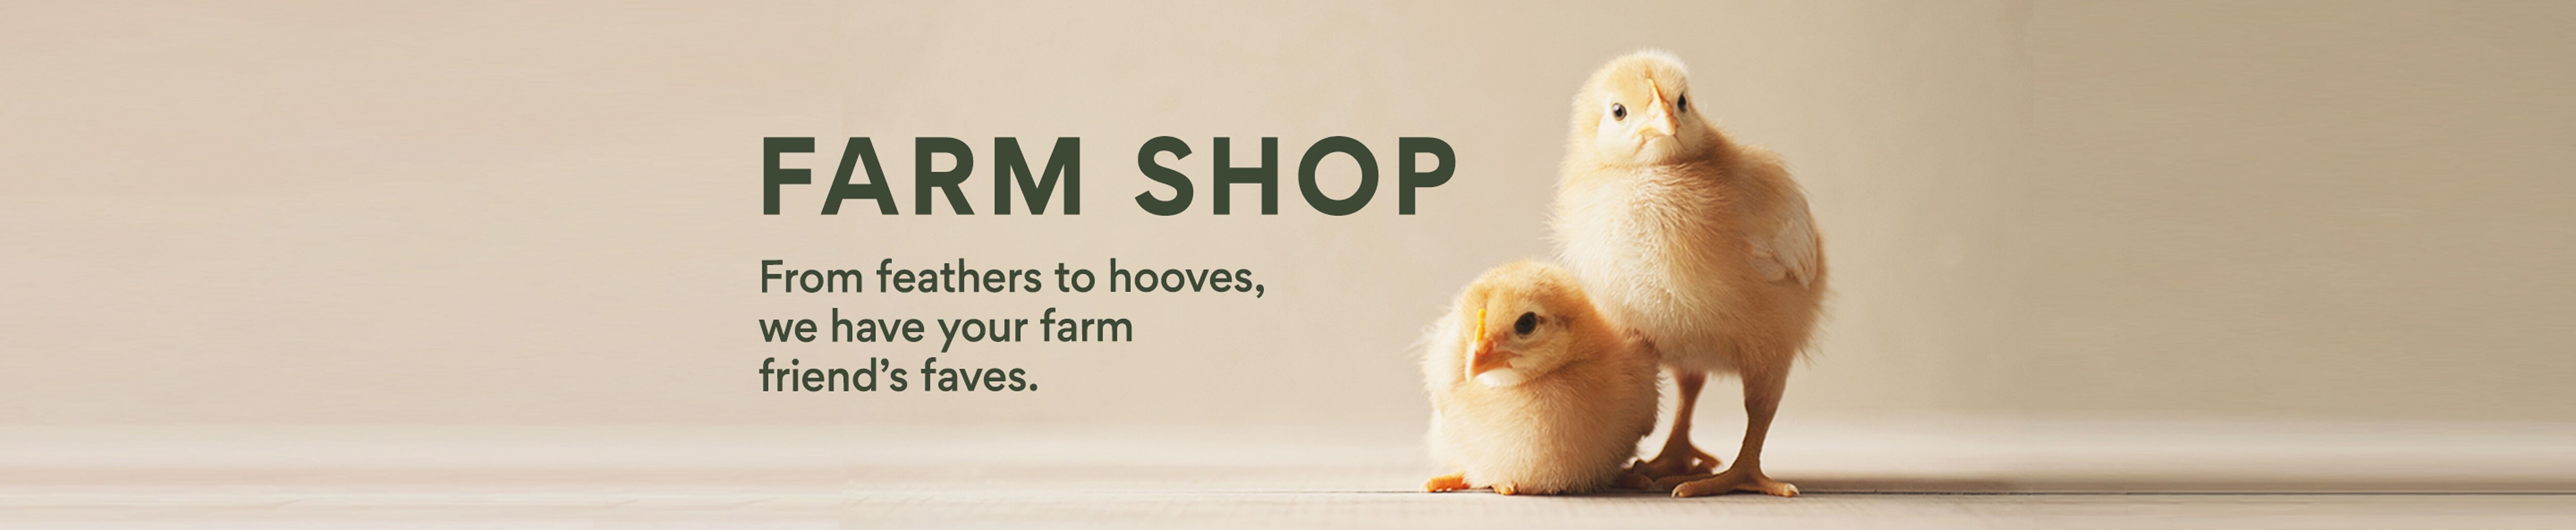 Farm Shop. From feathers to hooves, we have your farm friend's faves.